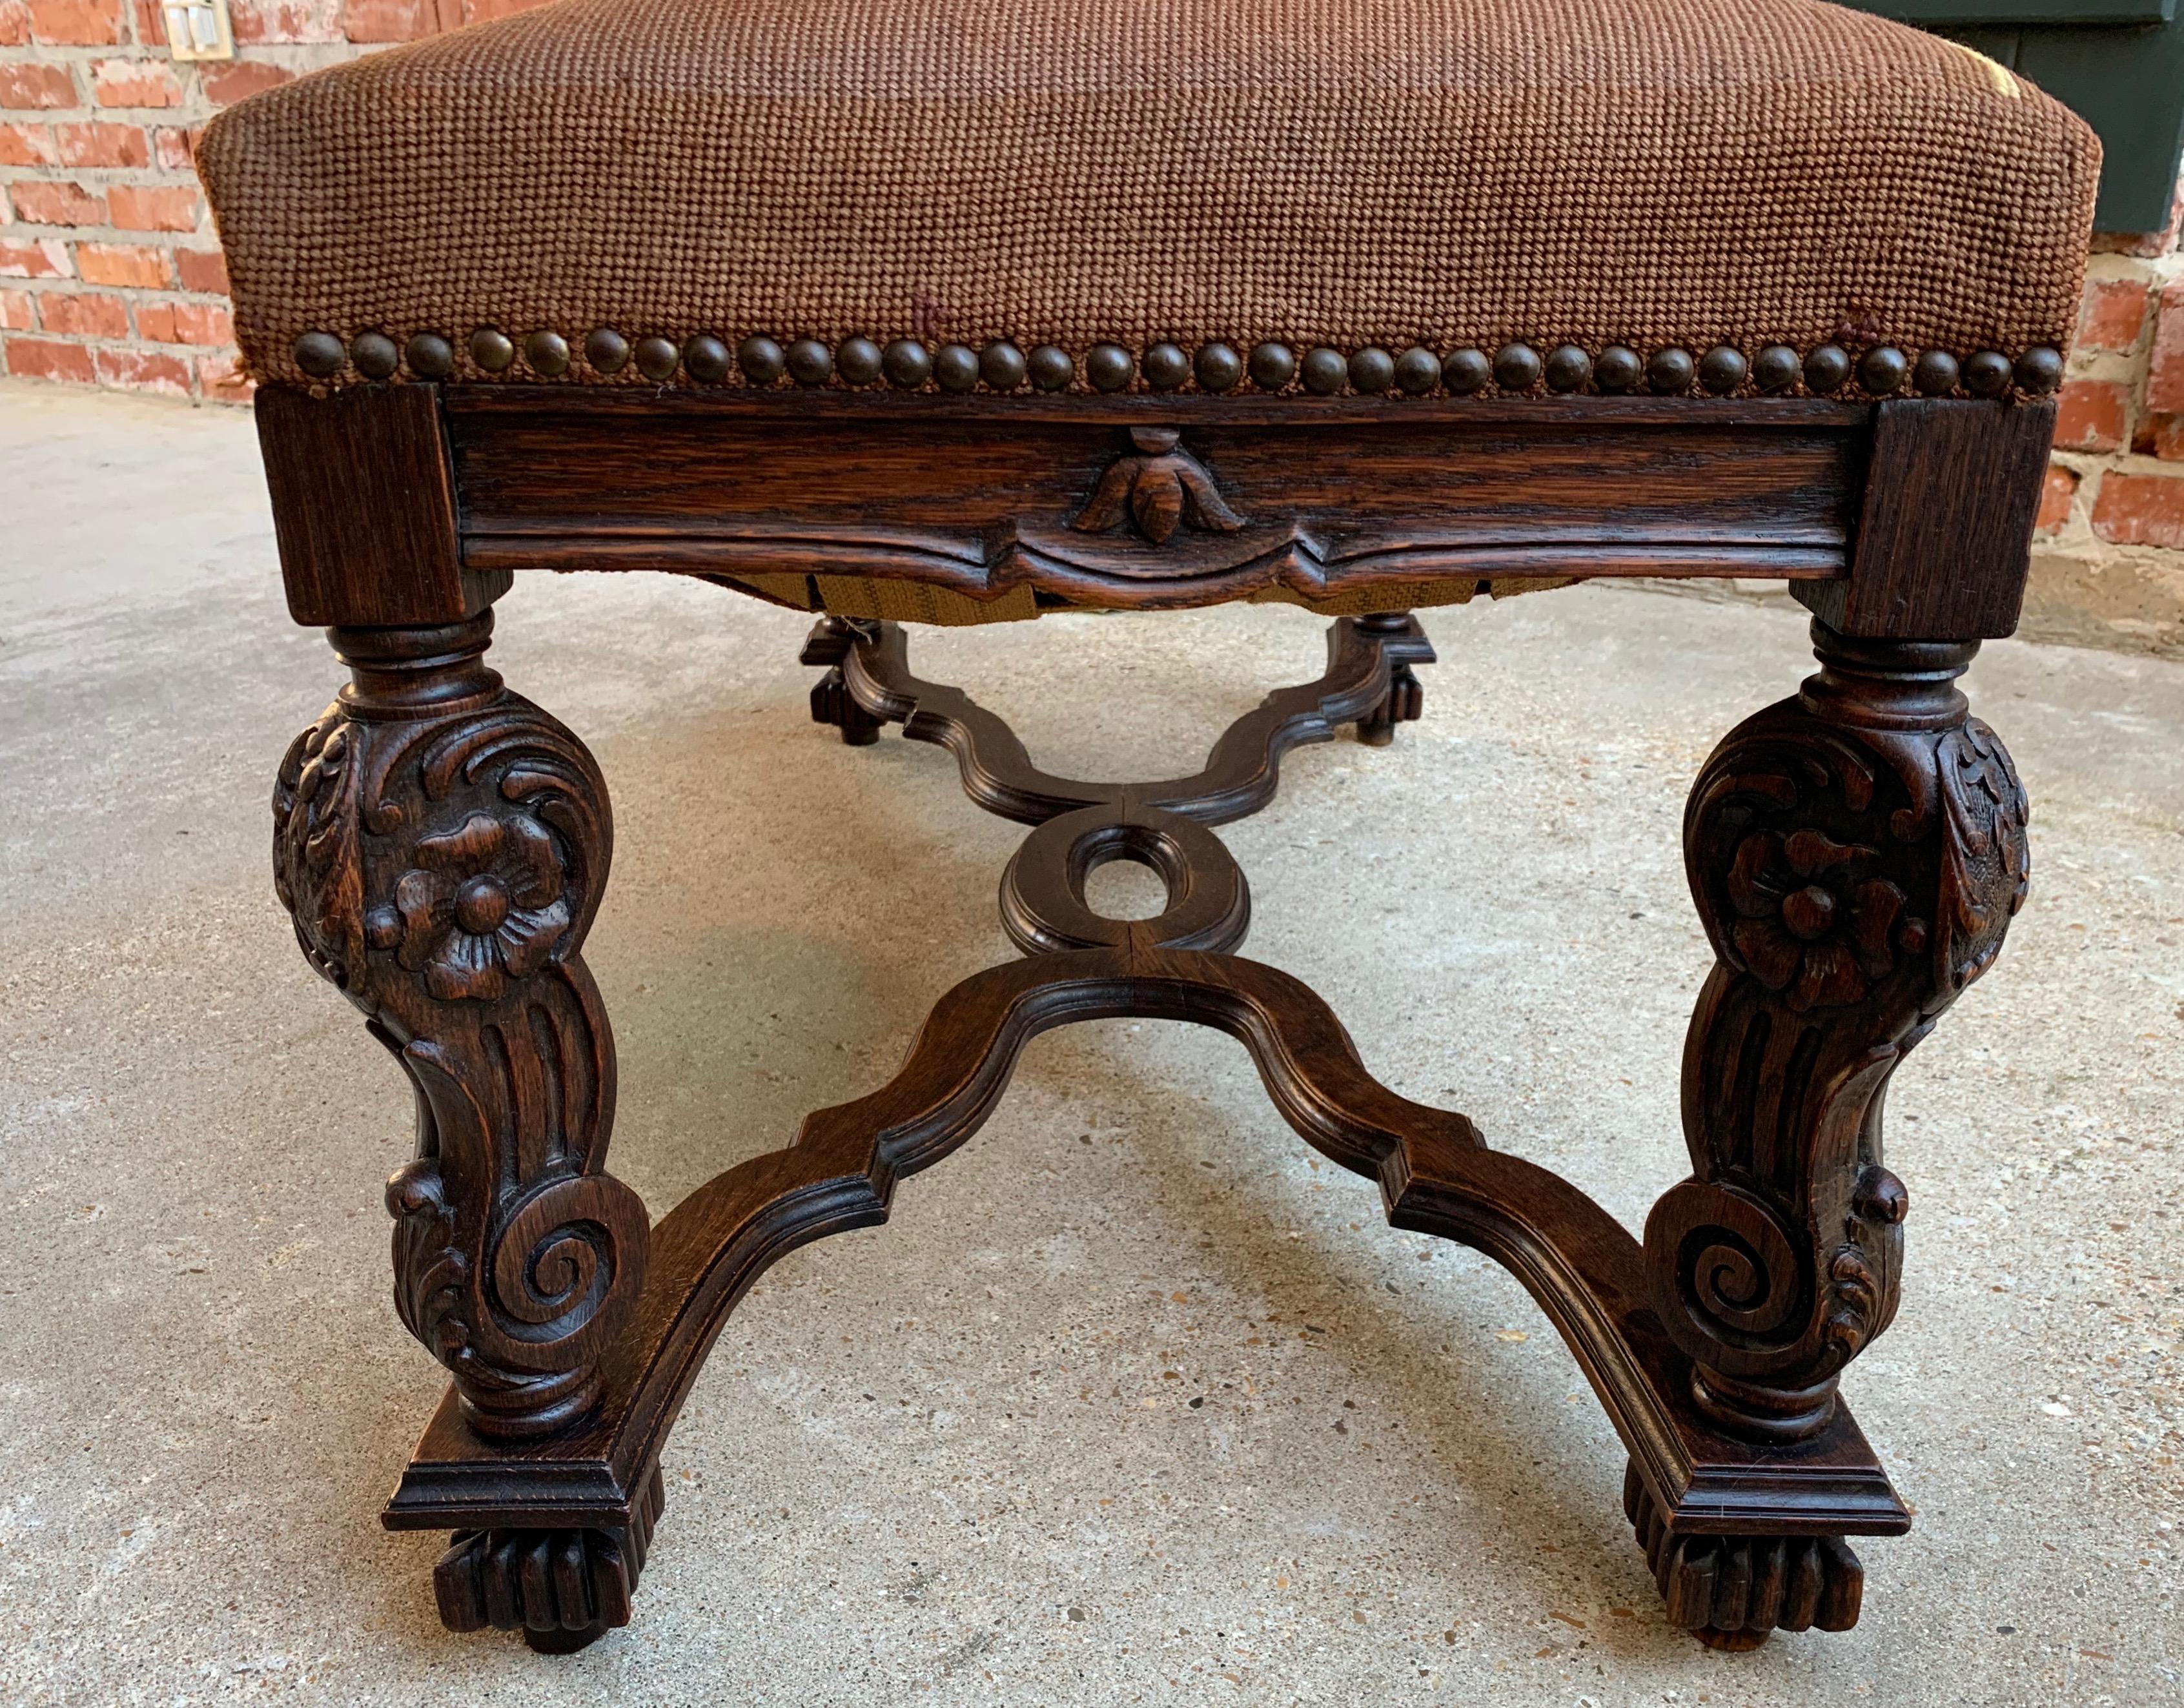 Wood 20th Century French Carved Oak Bench Stool Louis XV Style Needlepoint Ottoman